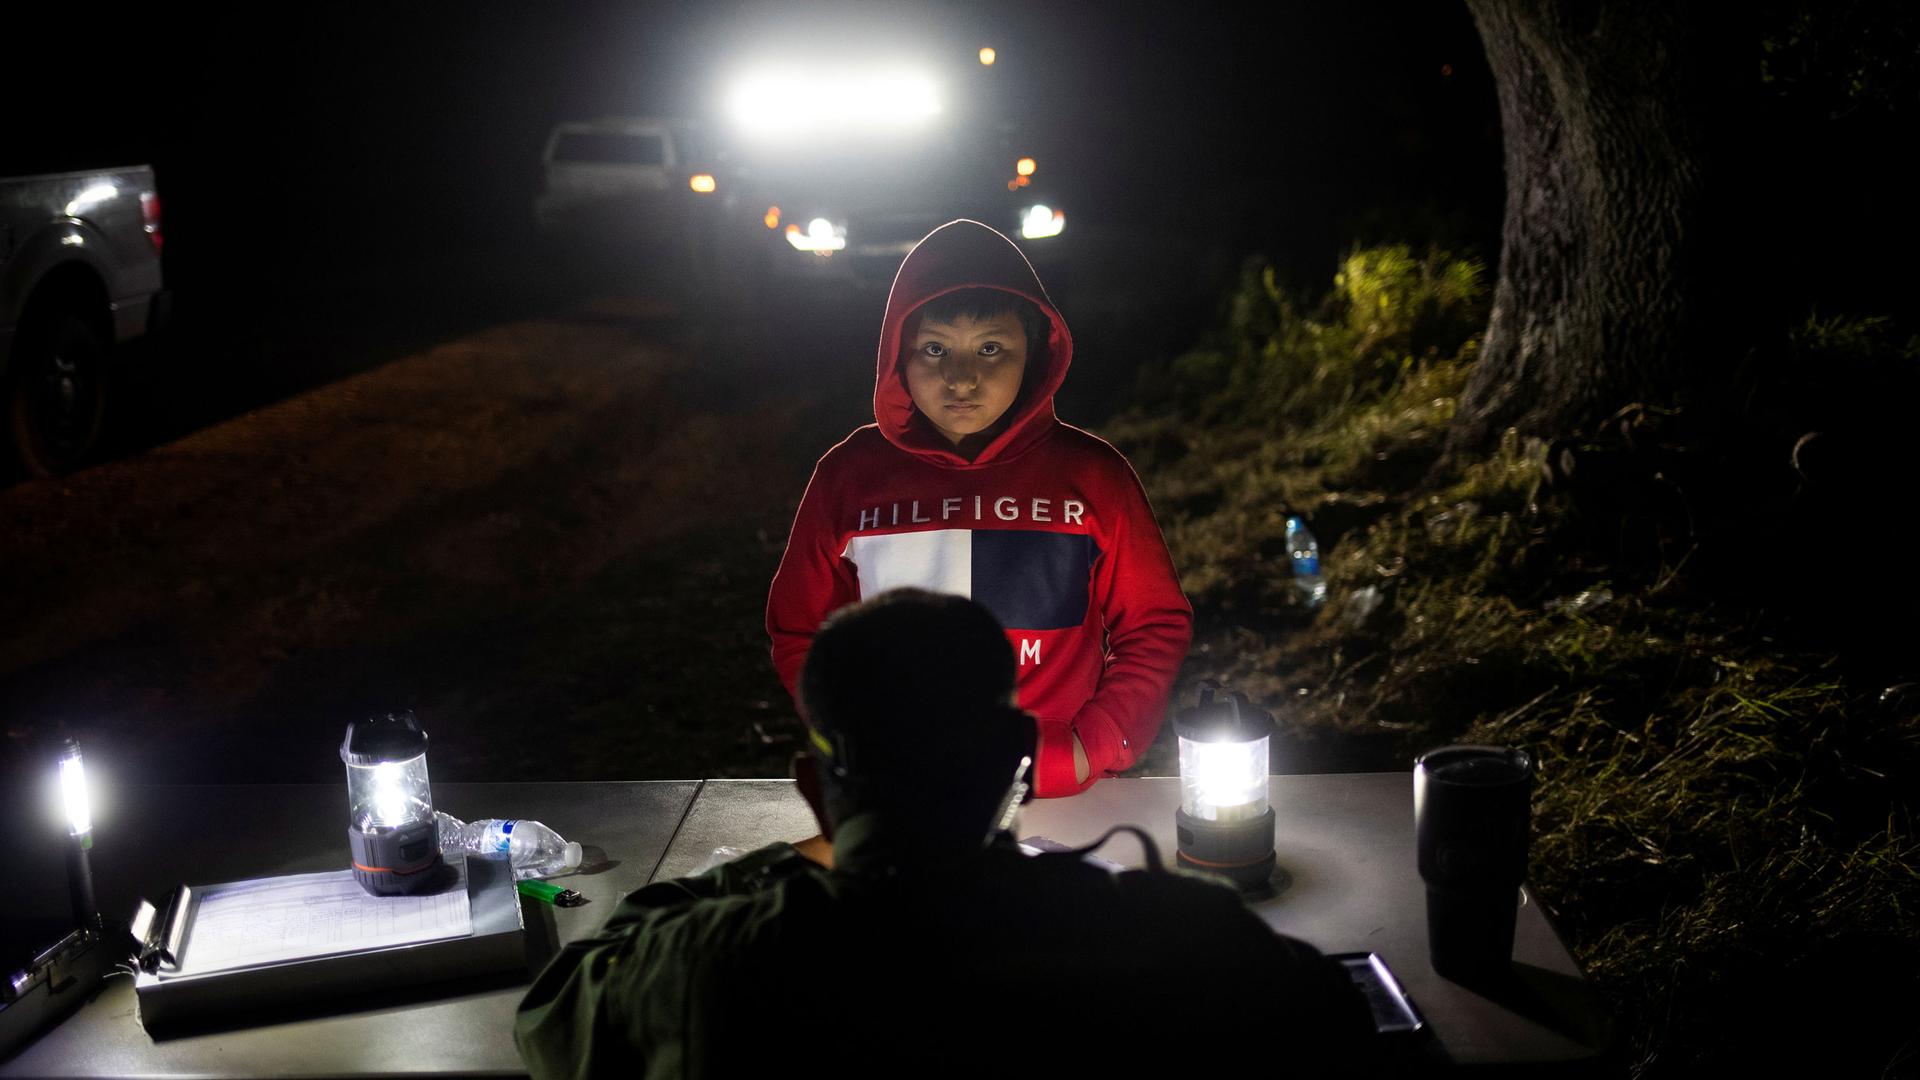 A young boy is shown wearing a red hooded sweatshirt and standing at a border patrol table.